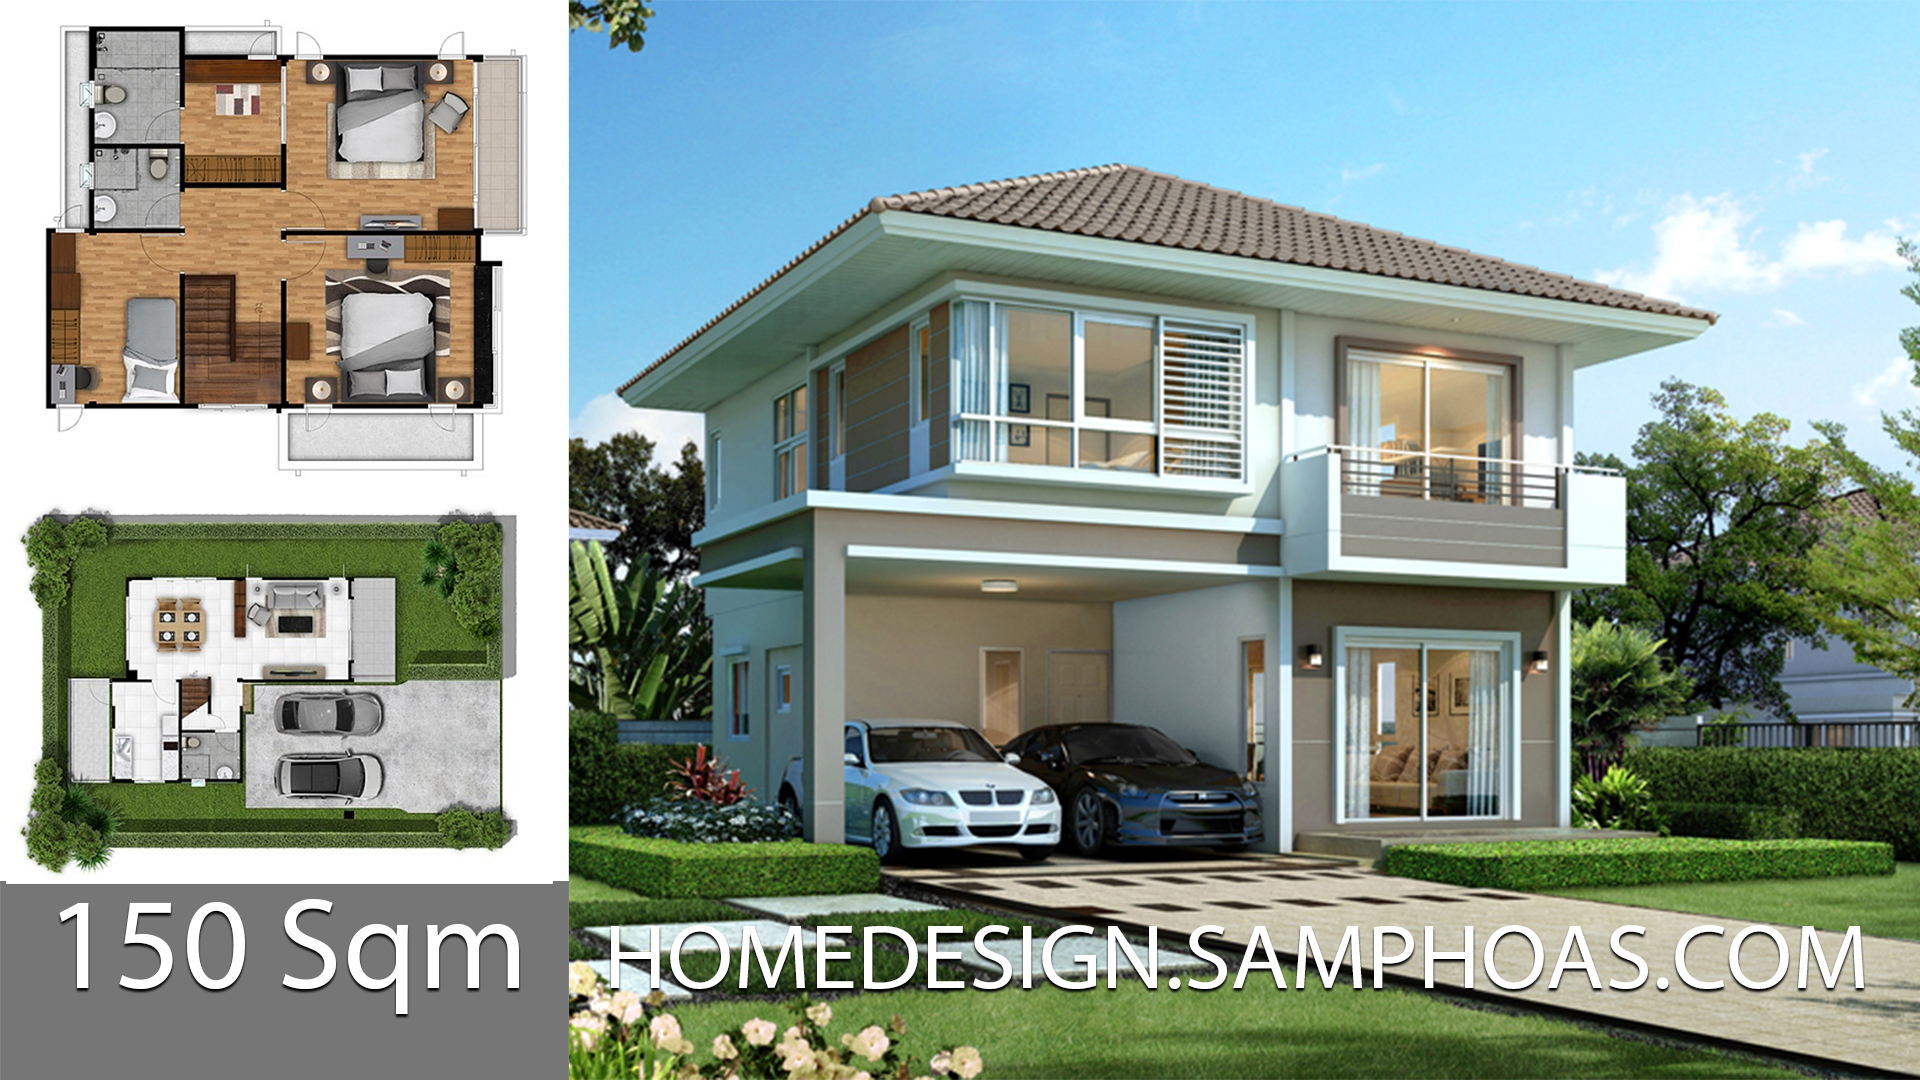 150 Sqm Home design Plans with 3 bedrooms - House Plans 3D